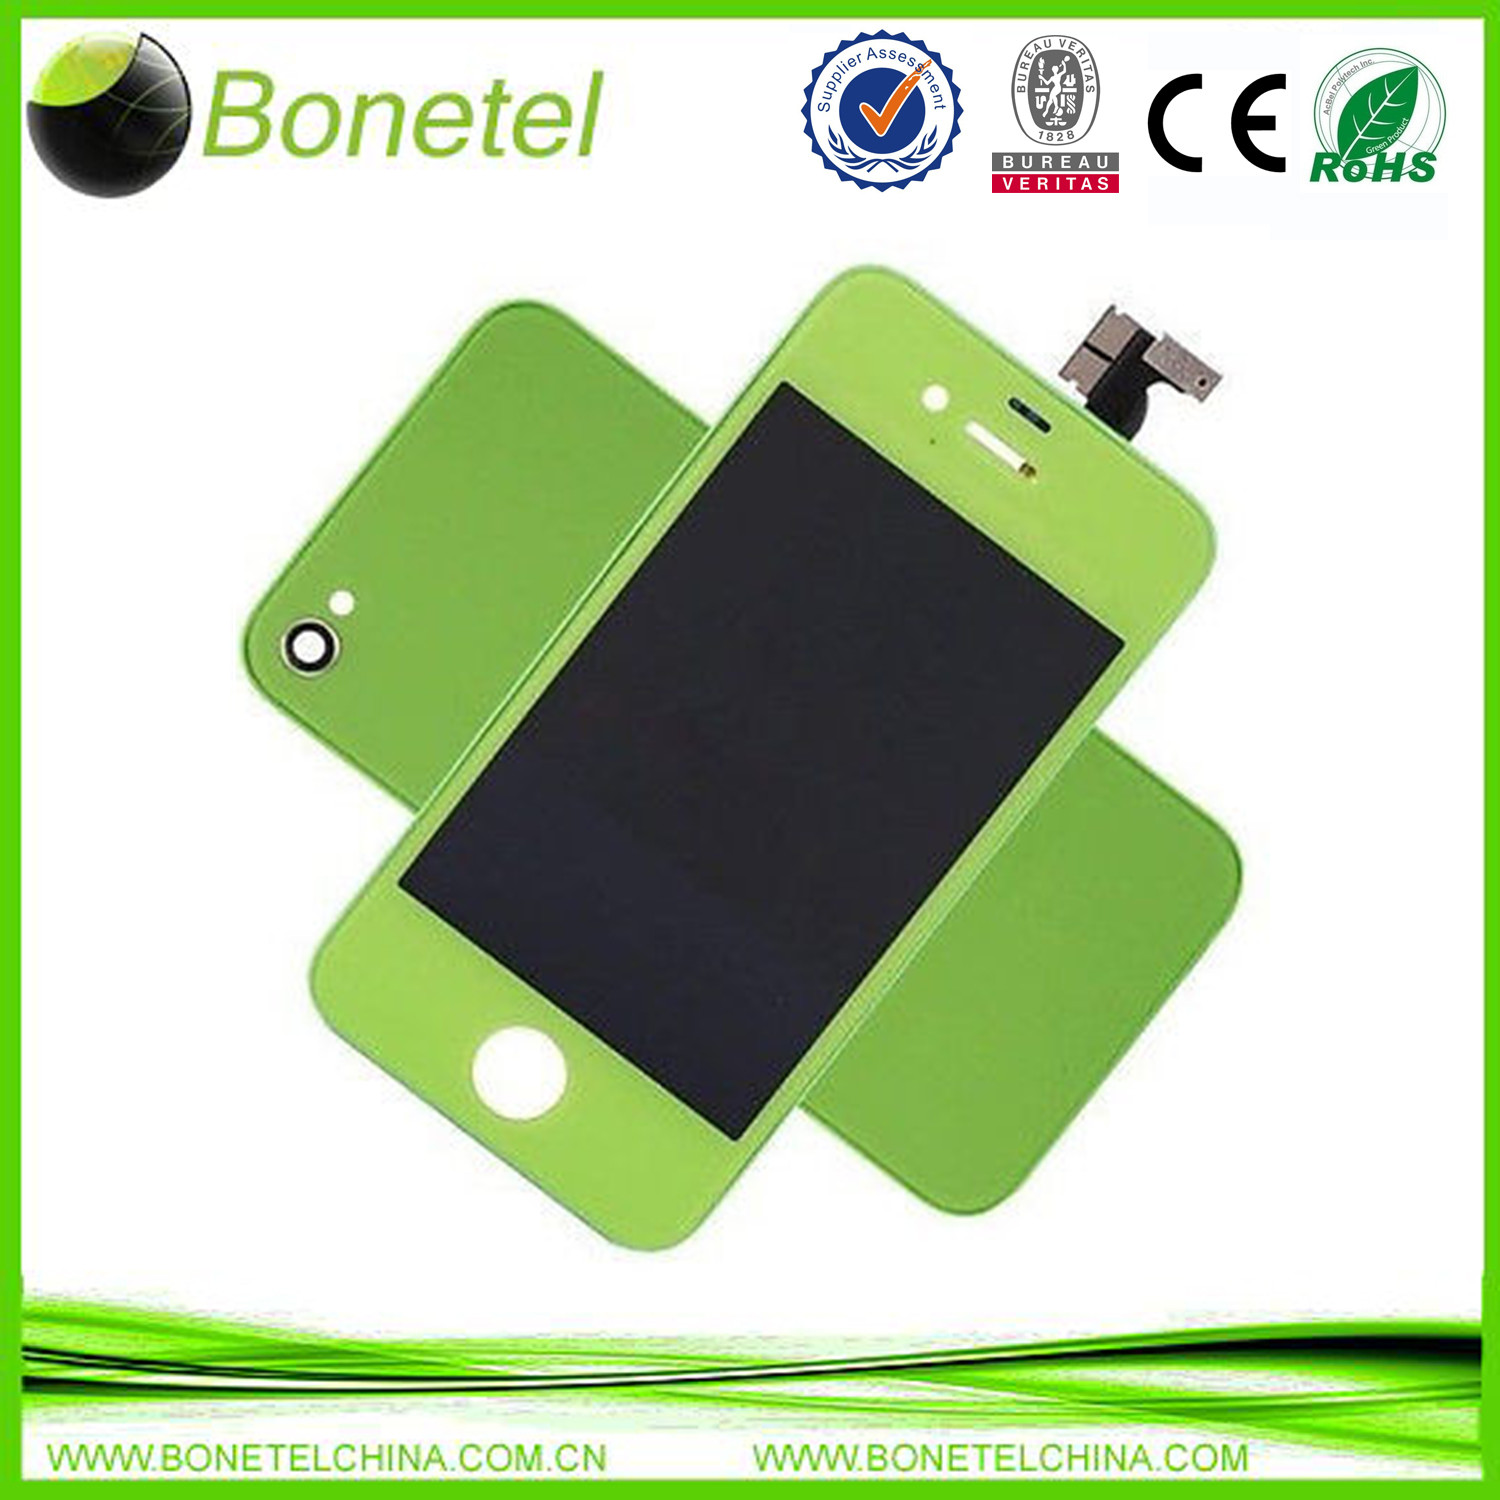 Green LCD Touch Screen Digitizer Replacement Assembly for iPhone  4S GSM